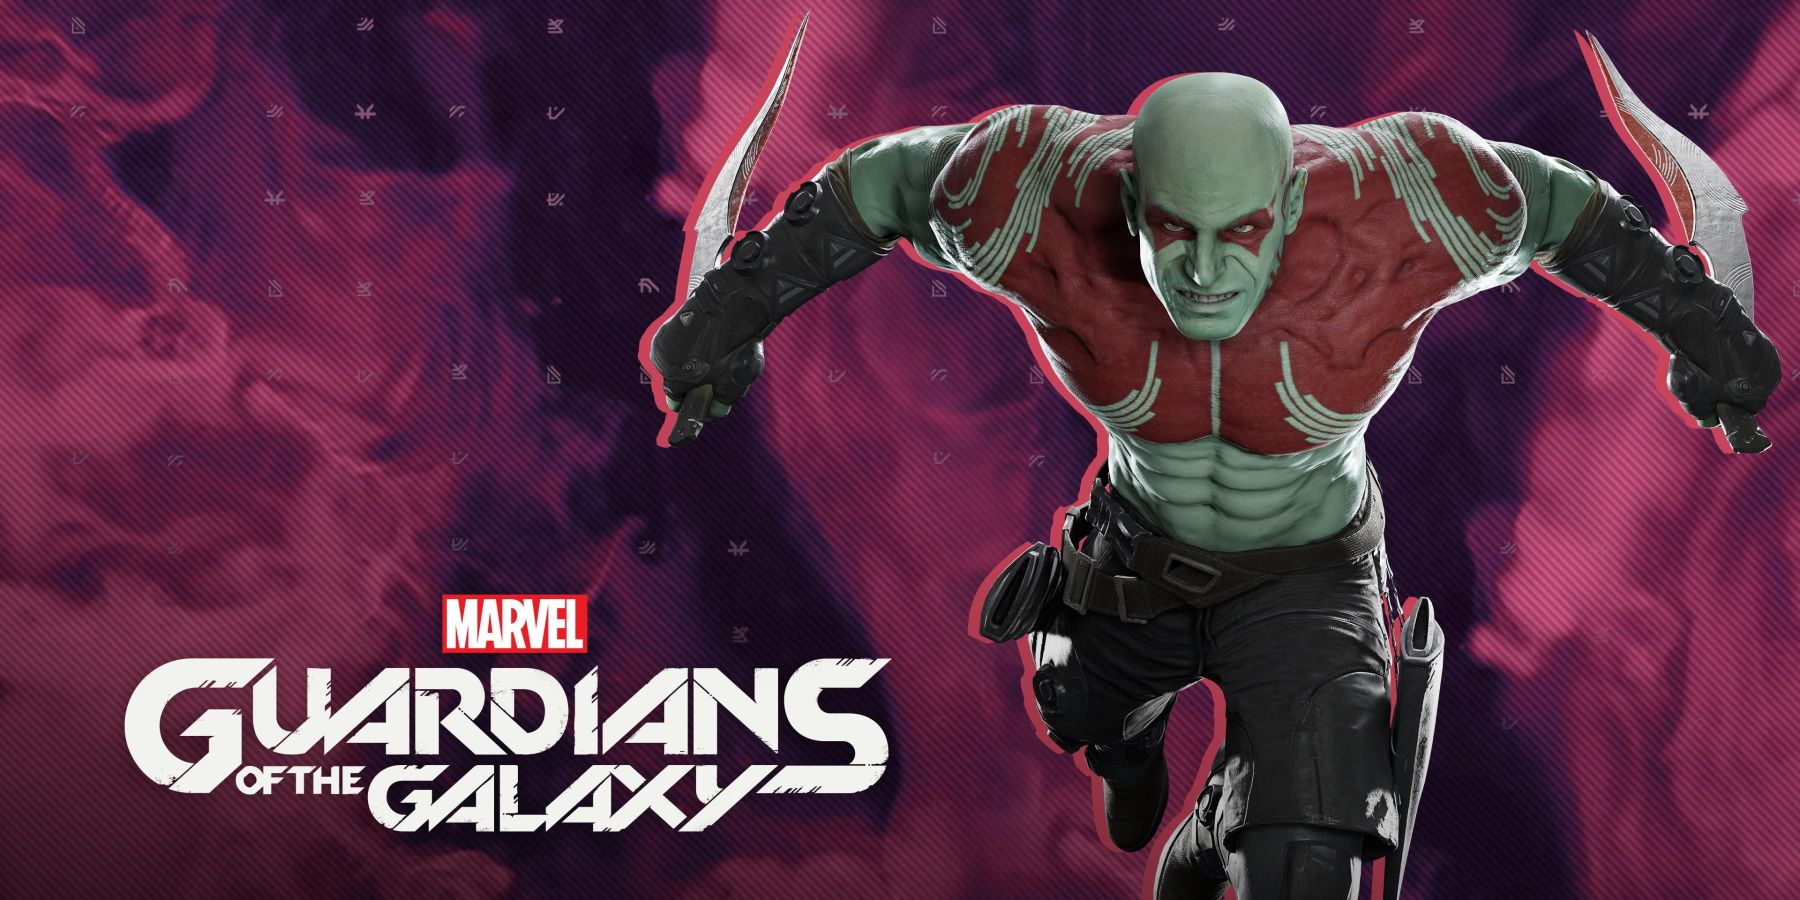 Marvel’s Guardians of the Galaxy drax promotional artwork